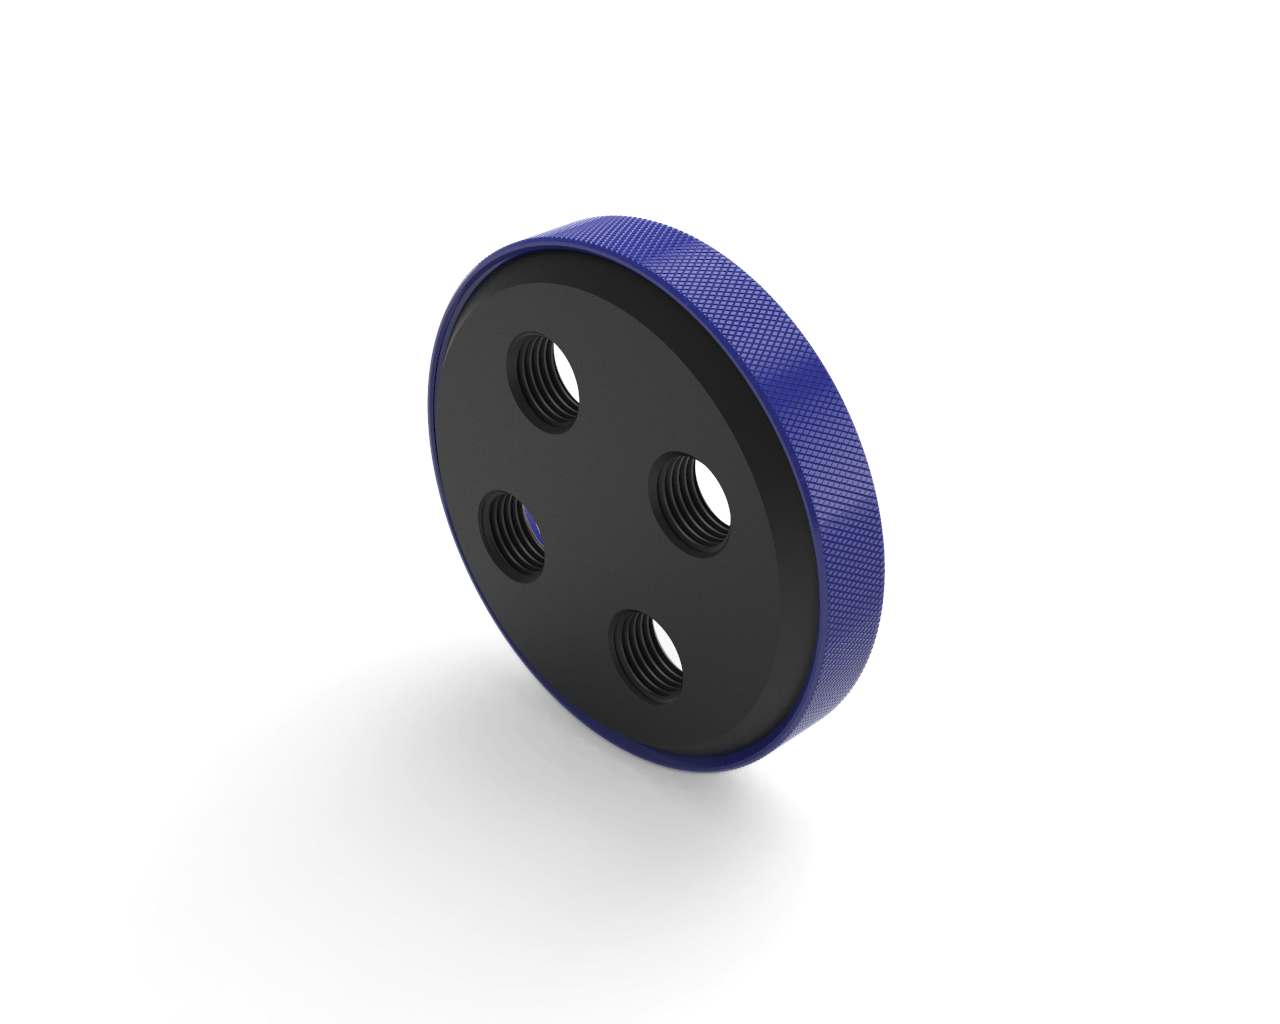 PrimoChill CTR Replacement SX Compression Ring - PrimoChill - KEEPING IT COOL True Blue